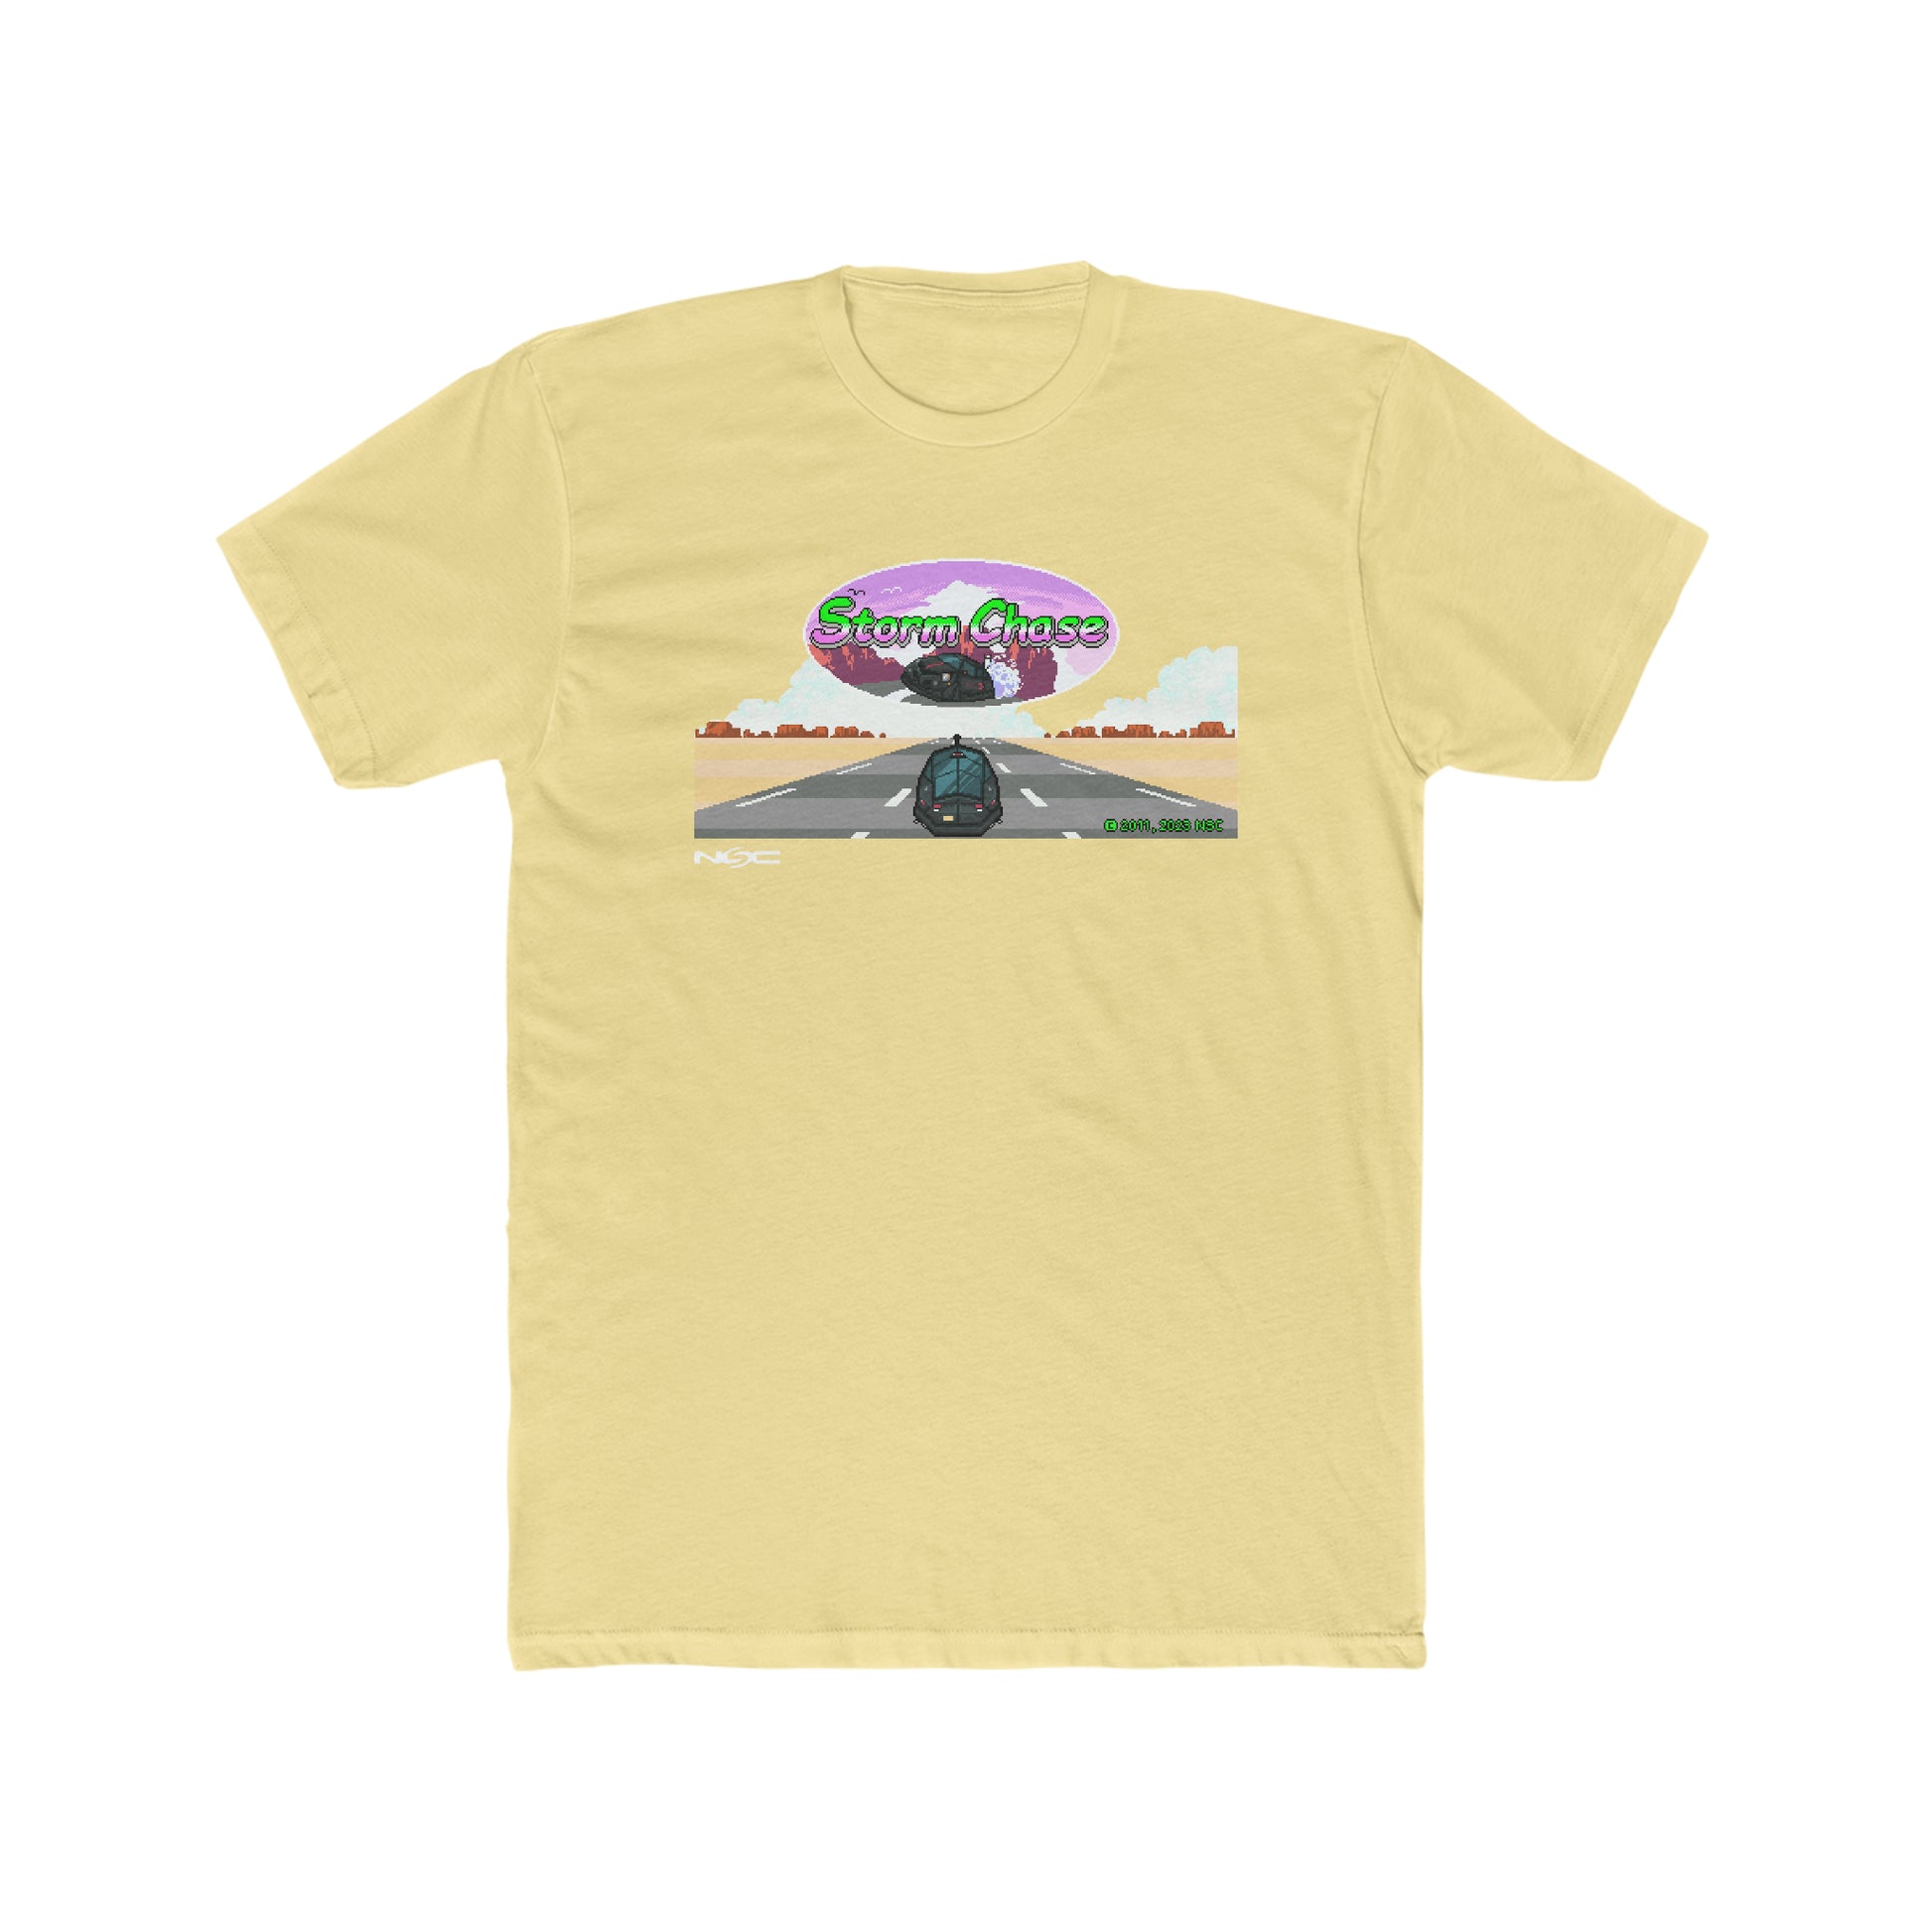 STORM CHASE 8-BIT RETRO TEE - Never Stop Chasing